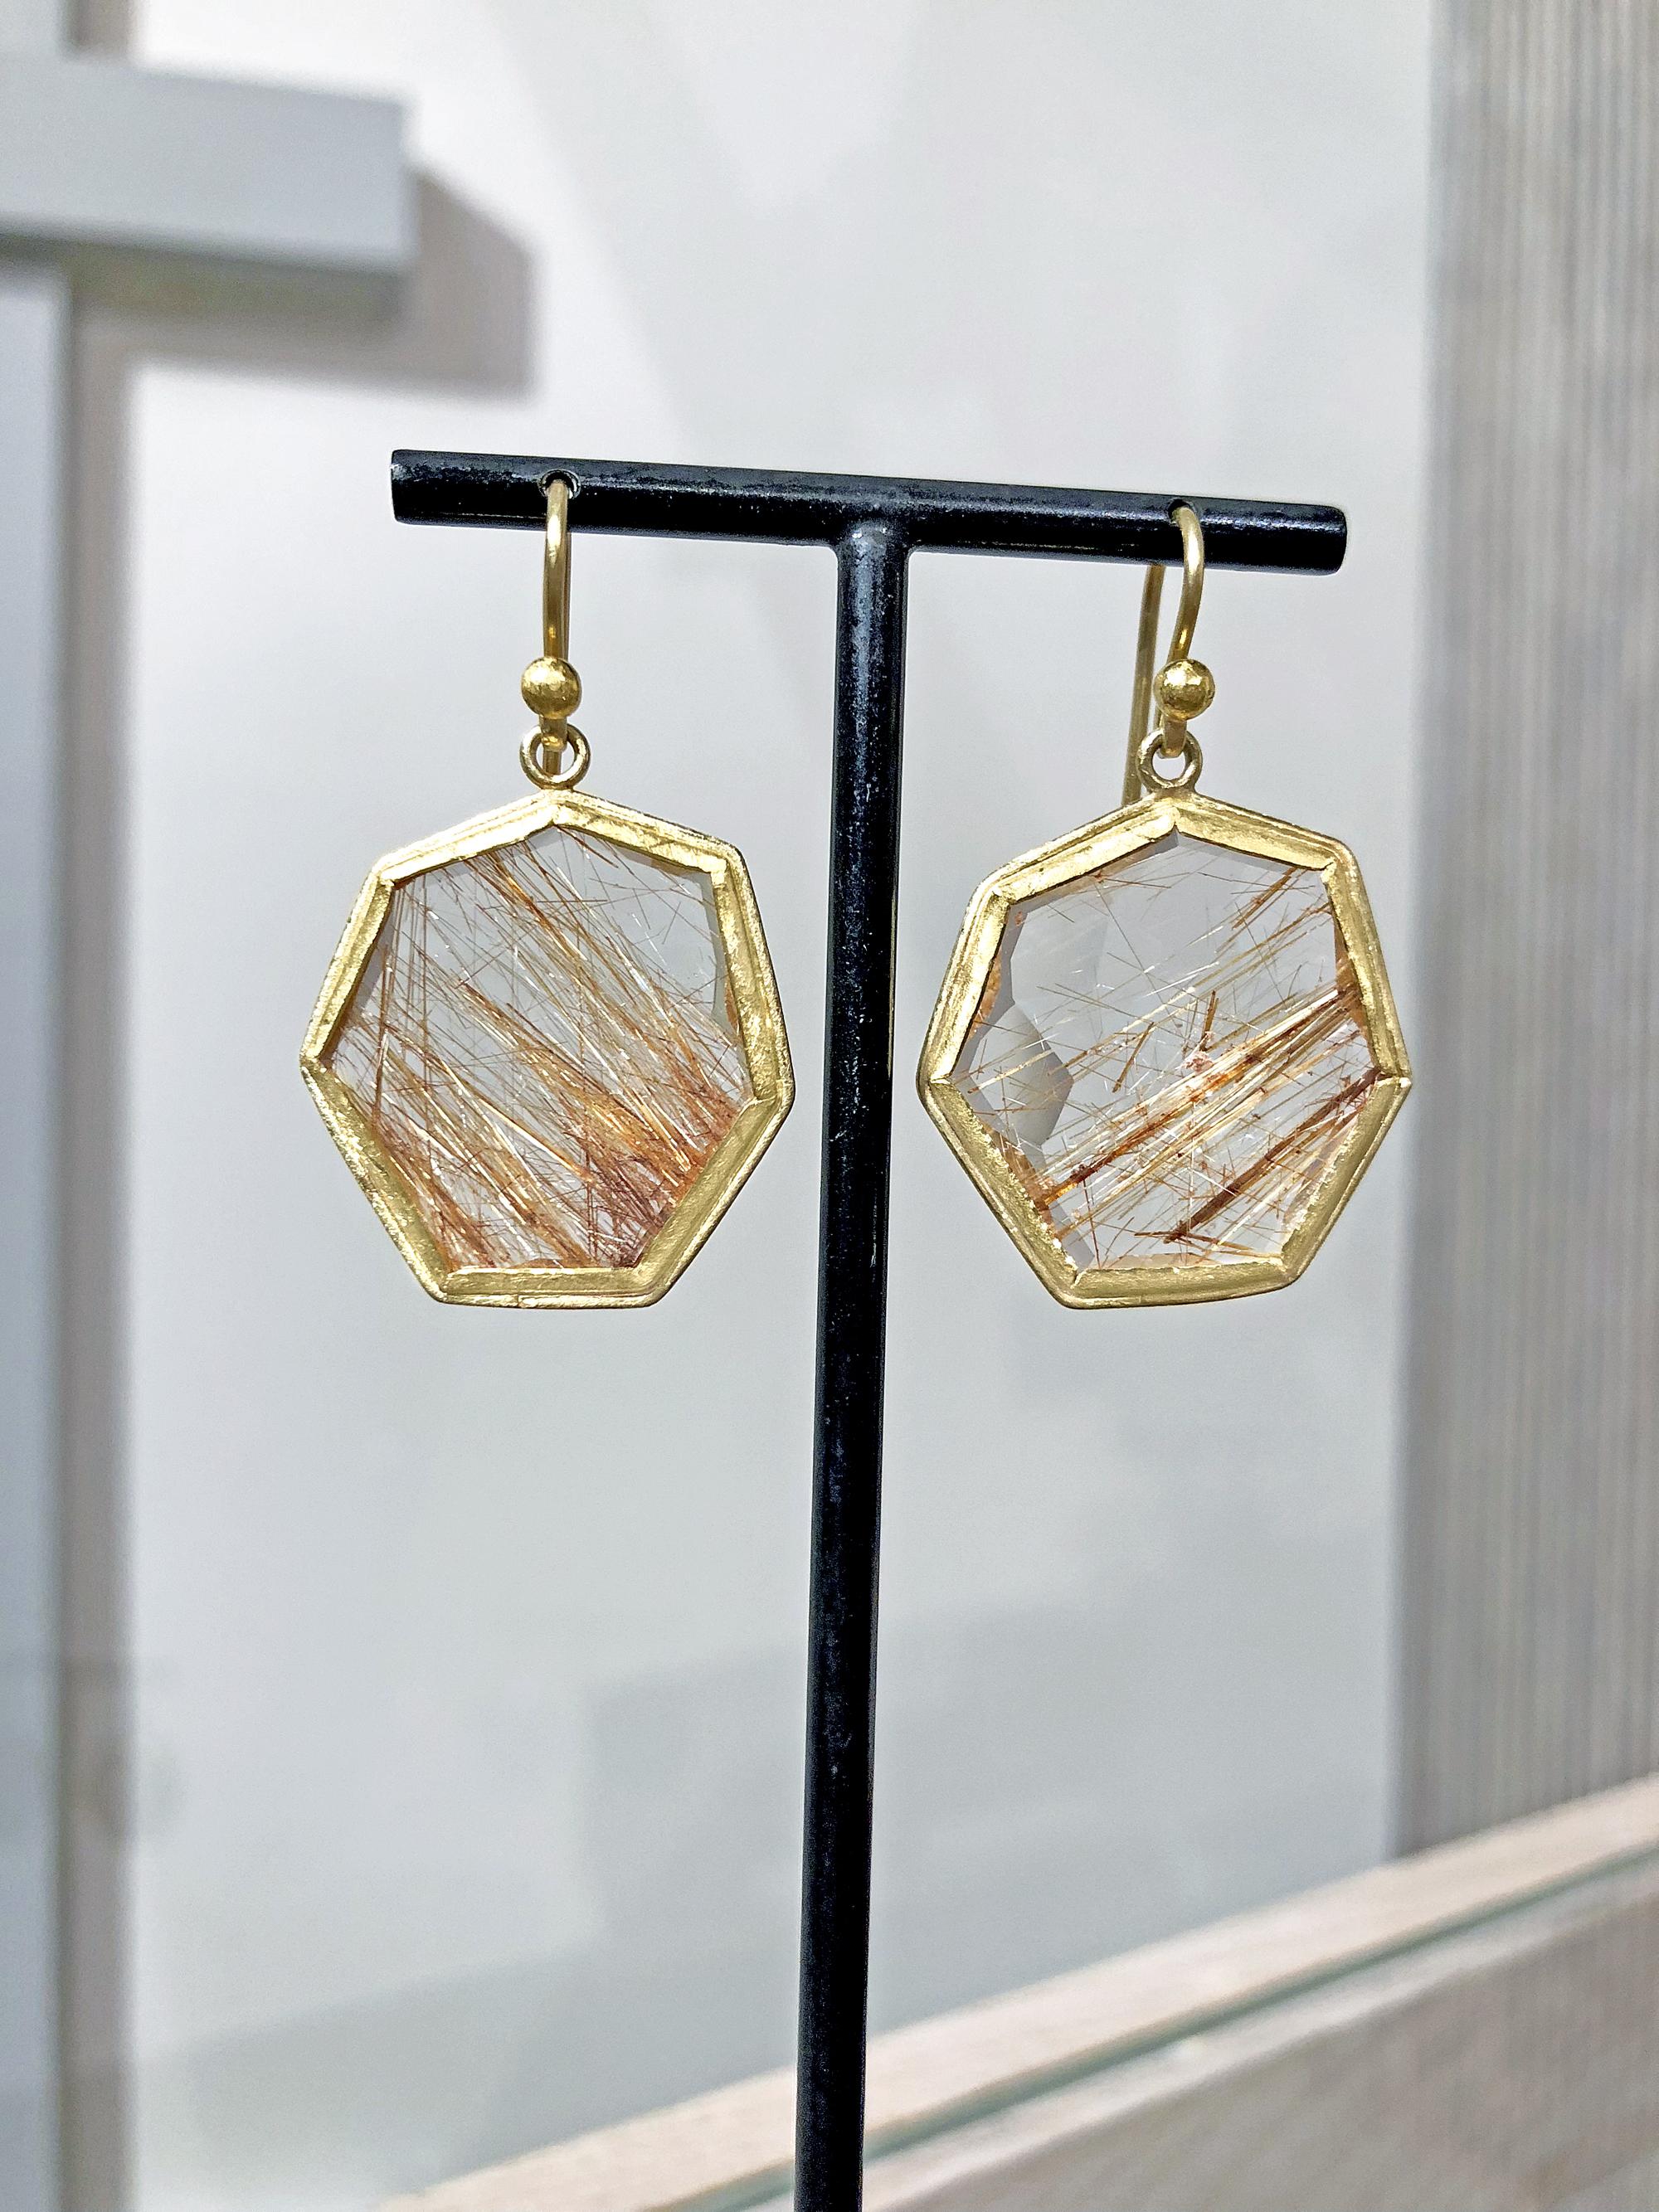 One of a Kind Heptagon Drop Earrings handmade by jewelry designer Petra Class in signature matte-finished 22k yellow gold featuring a matched pair of shimmering faceted rutilated quartz on 18k yellow gold wires. Stamped and Hallmarked 18k / 22k /